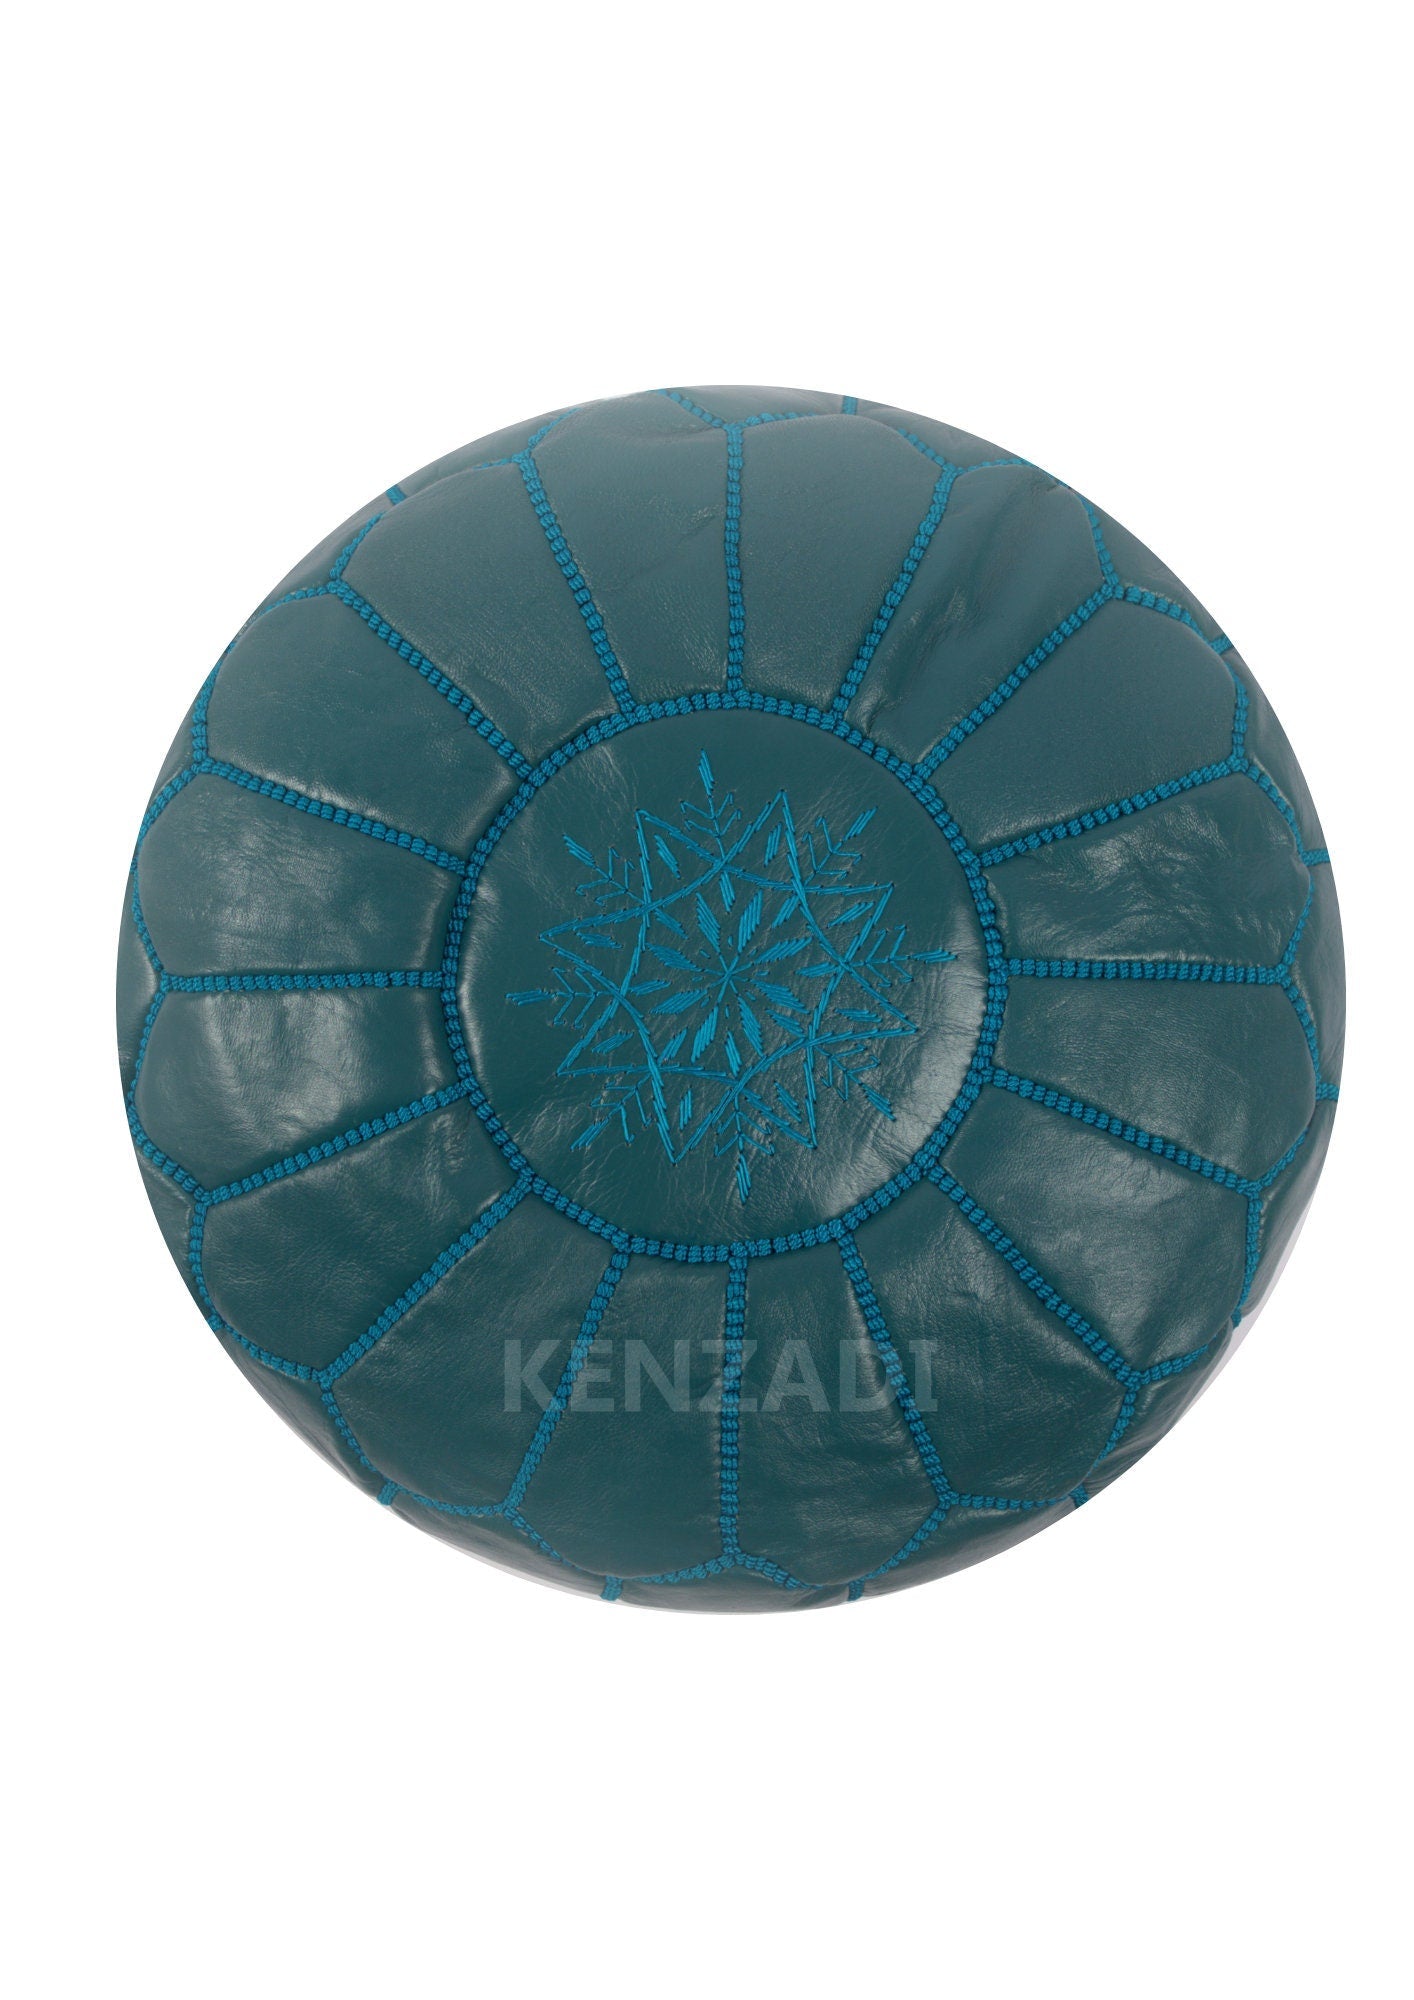 Authentic Moroccan leather pouf in TAN leather with Dark Blue and Blue embroidery - perfect for adding a bohemian touch to your home décor